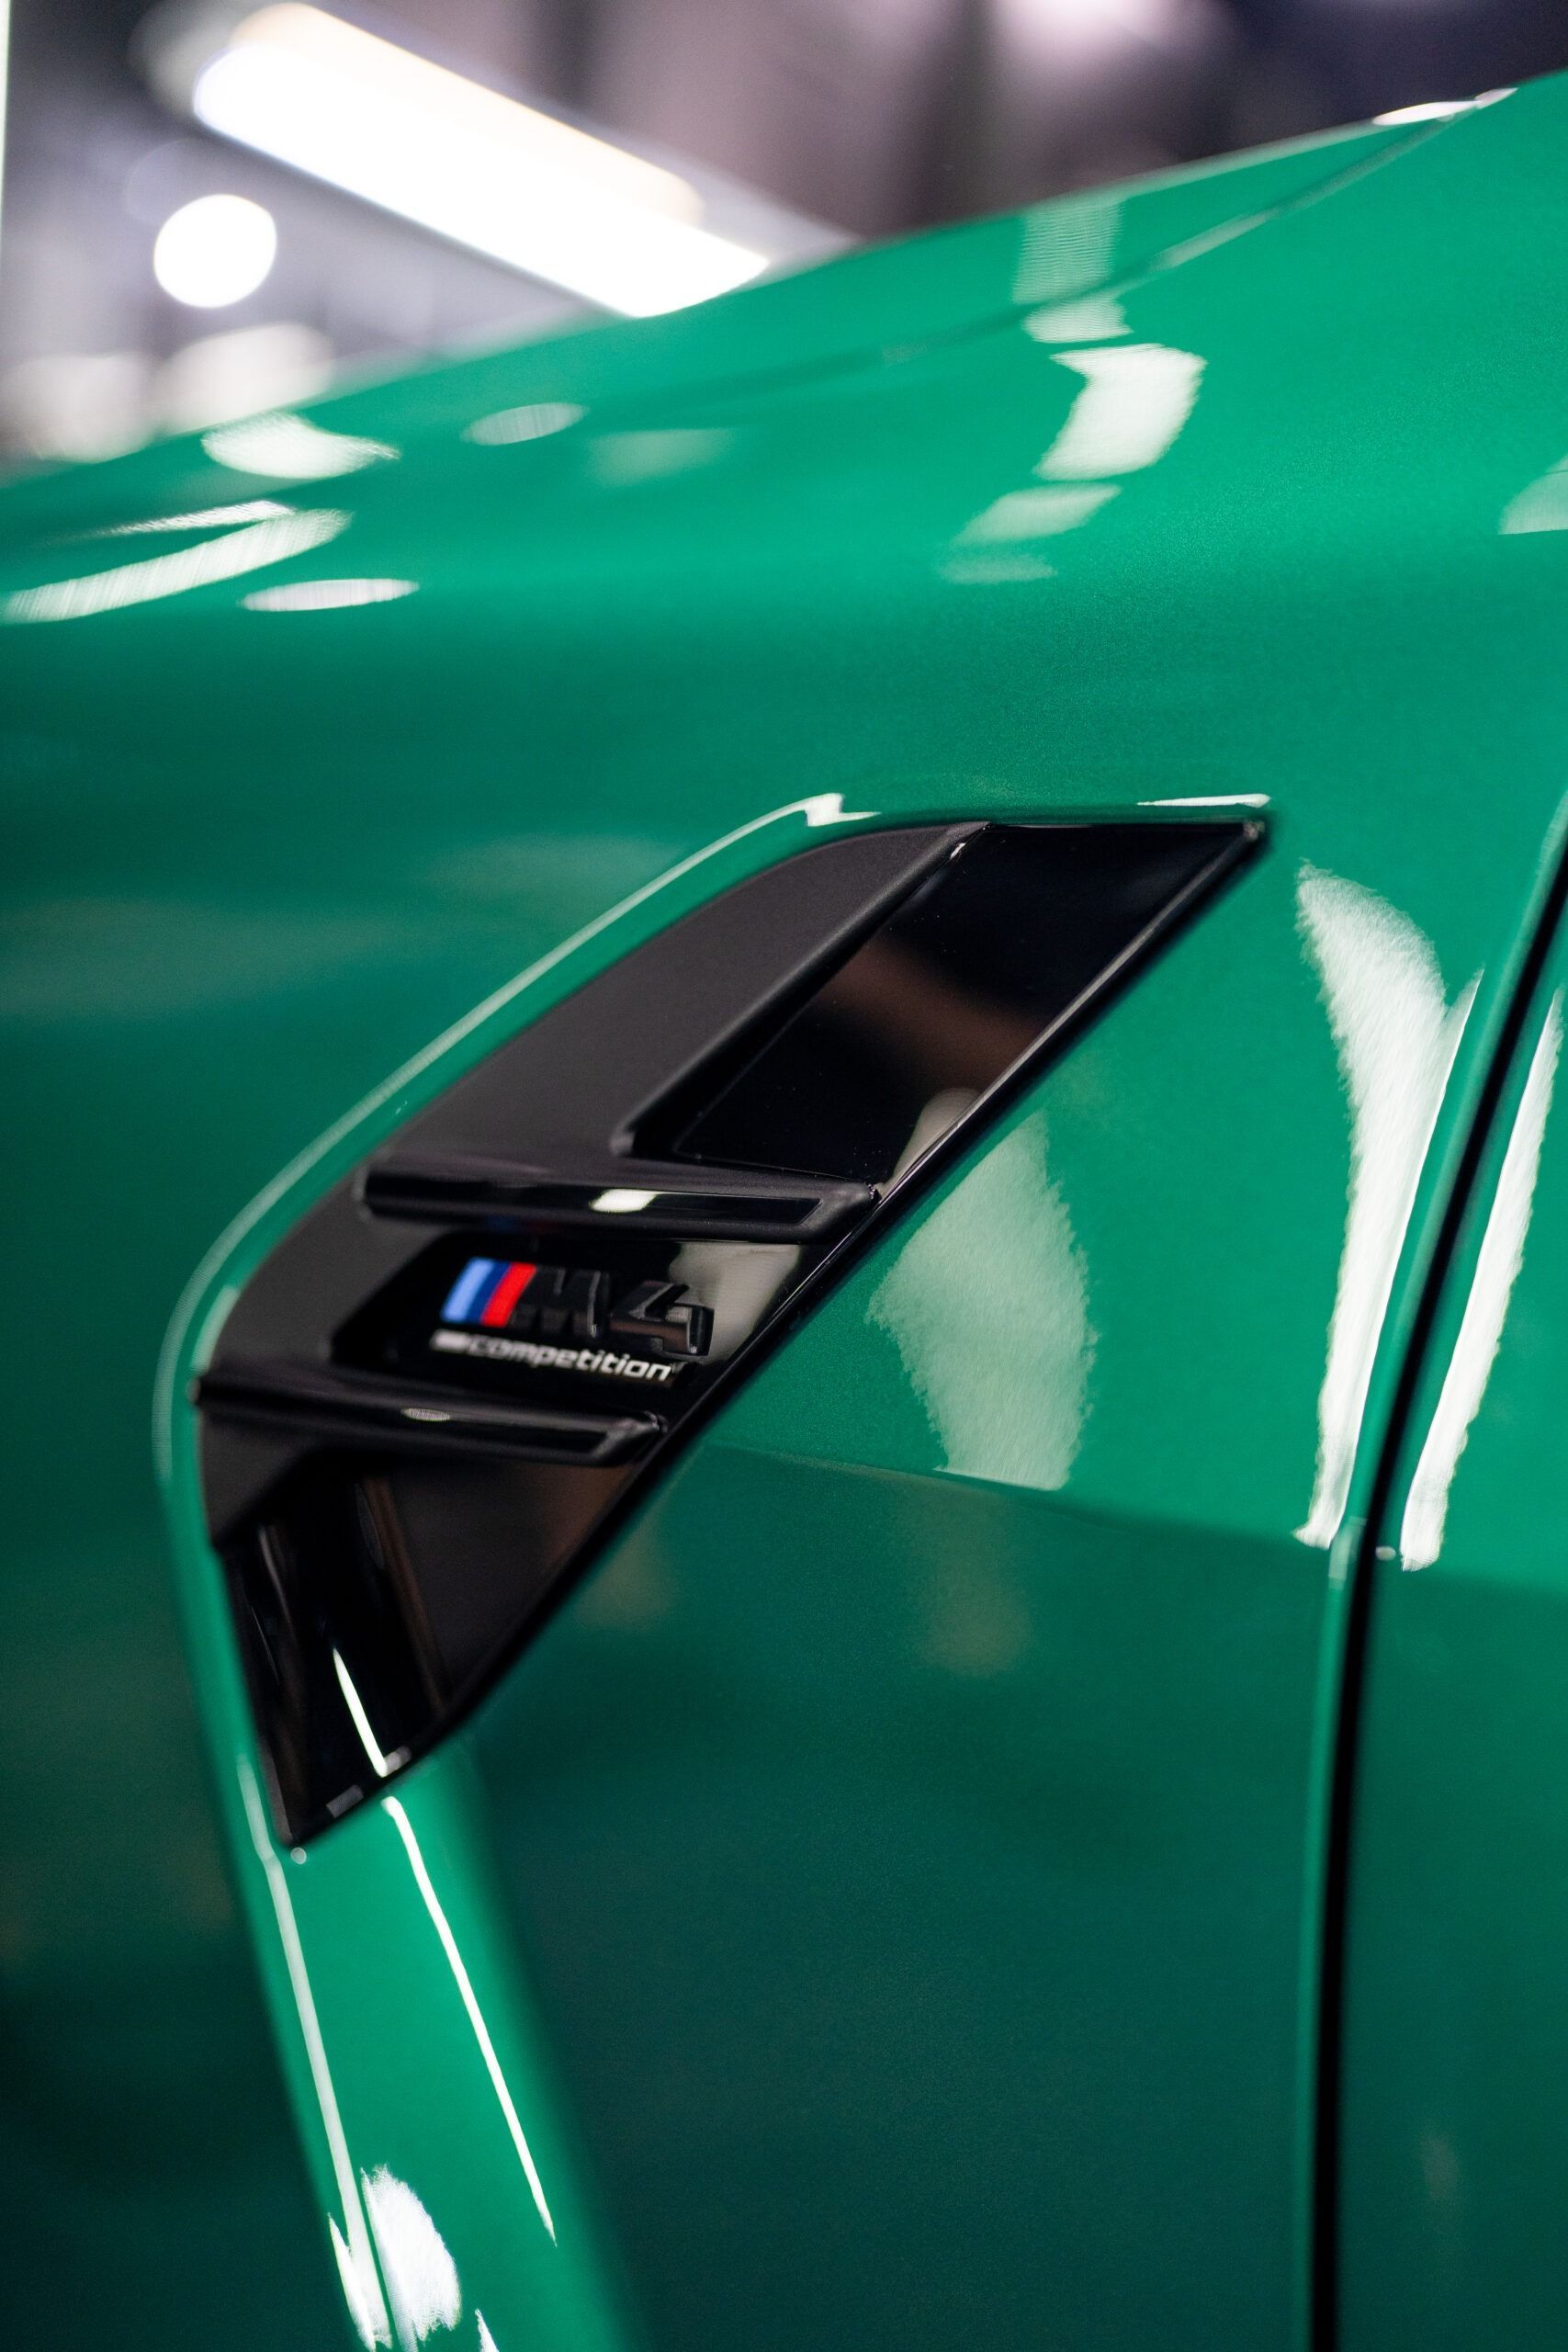 A close up of a green car with a black fender